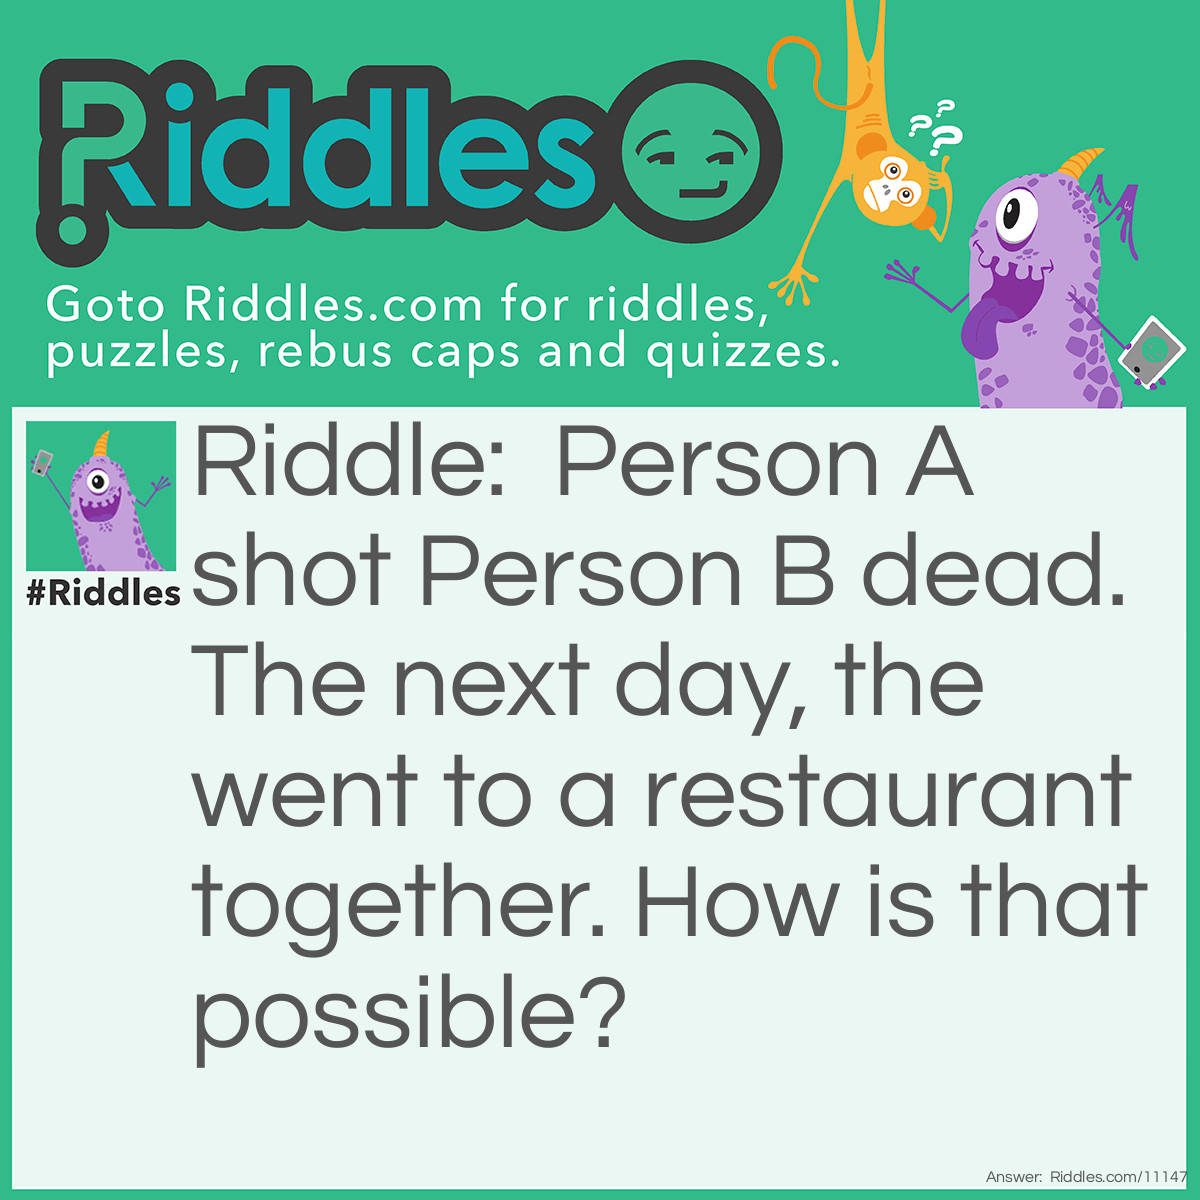 Riddle: Person A shot Person B dead. The next day, the went to a restaurant together. How is that possible? Answer: Person A was a film producer while Person B was an actor. Person A took a video of Person B acting dead. So no one was injured.